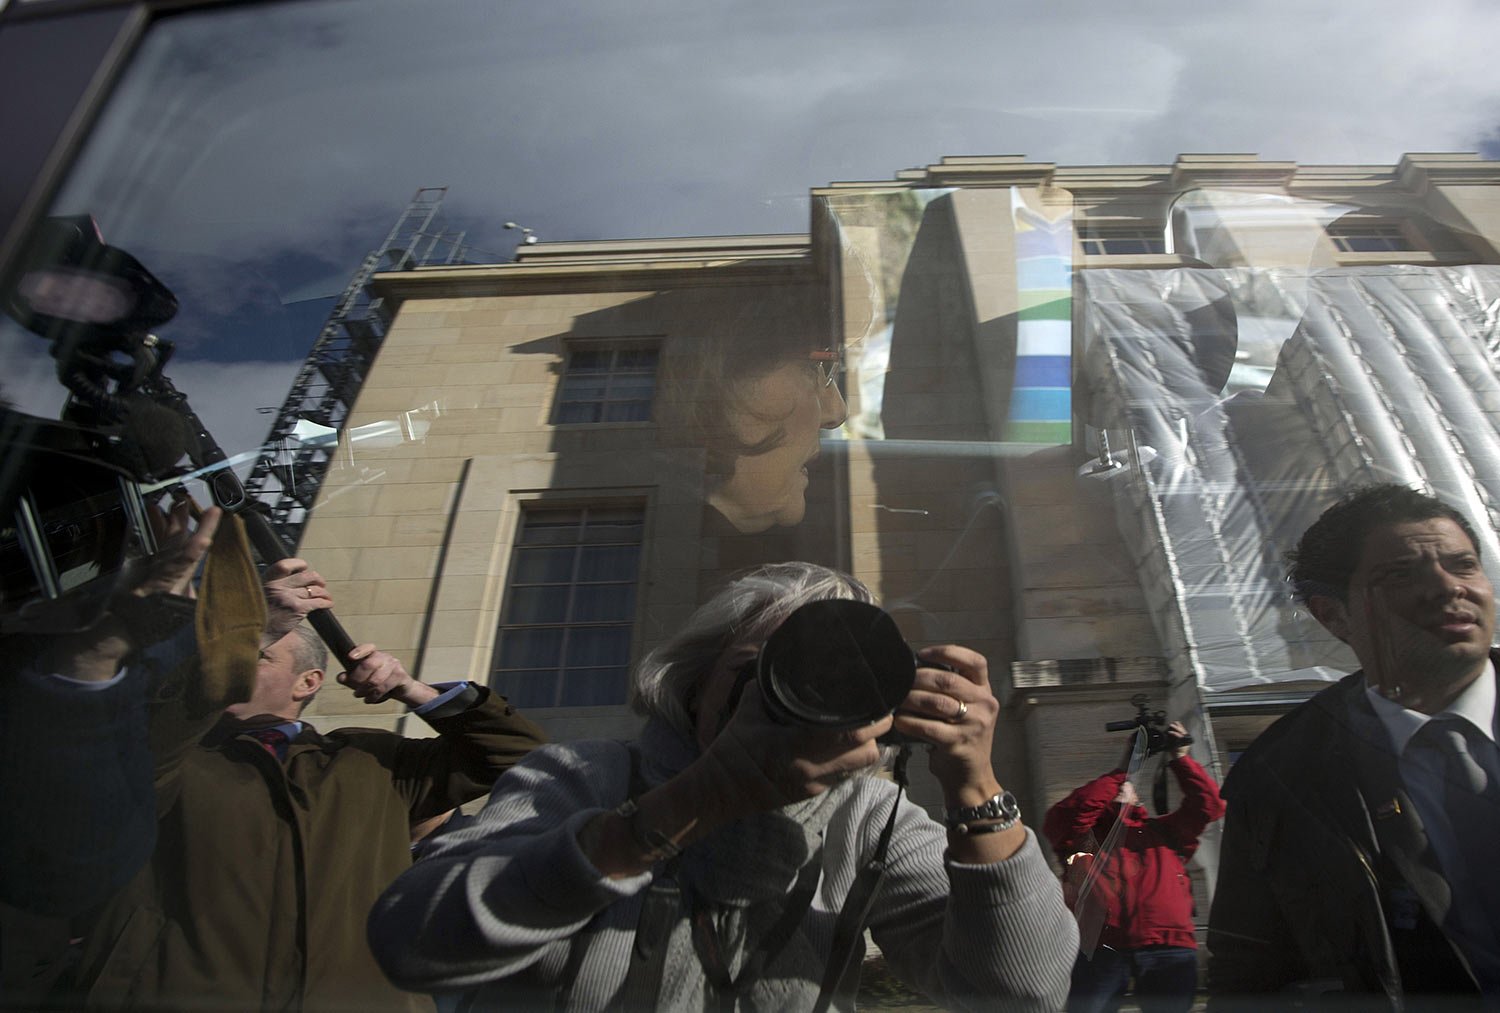  Journalists, including Associated Press photographer Anja Niedringhaus, reflected in the window at lower center, surround the car of Bouthaina Shaaban, advisor to Syrian President Assad, as she leaves after meeting with the Syrian opposition at the 